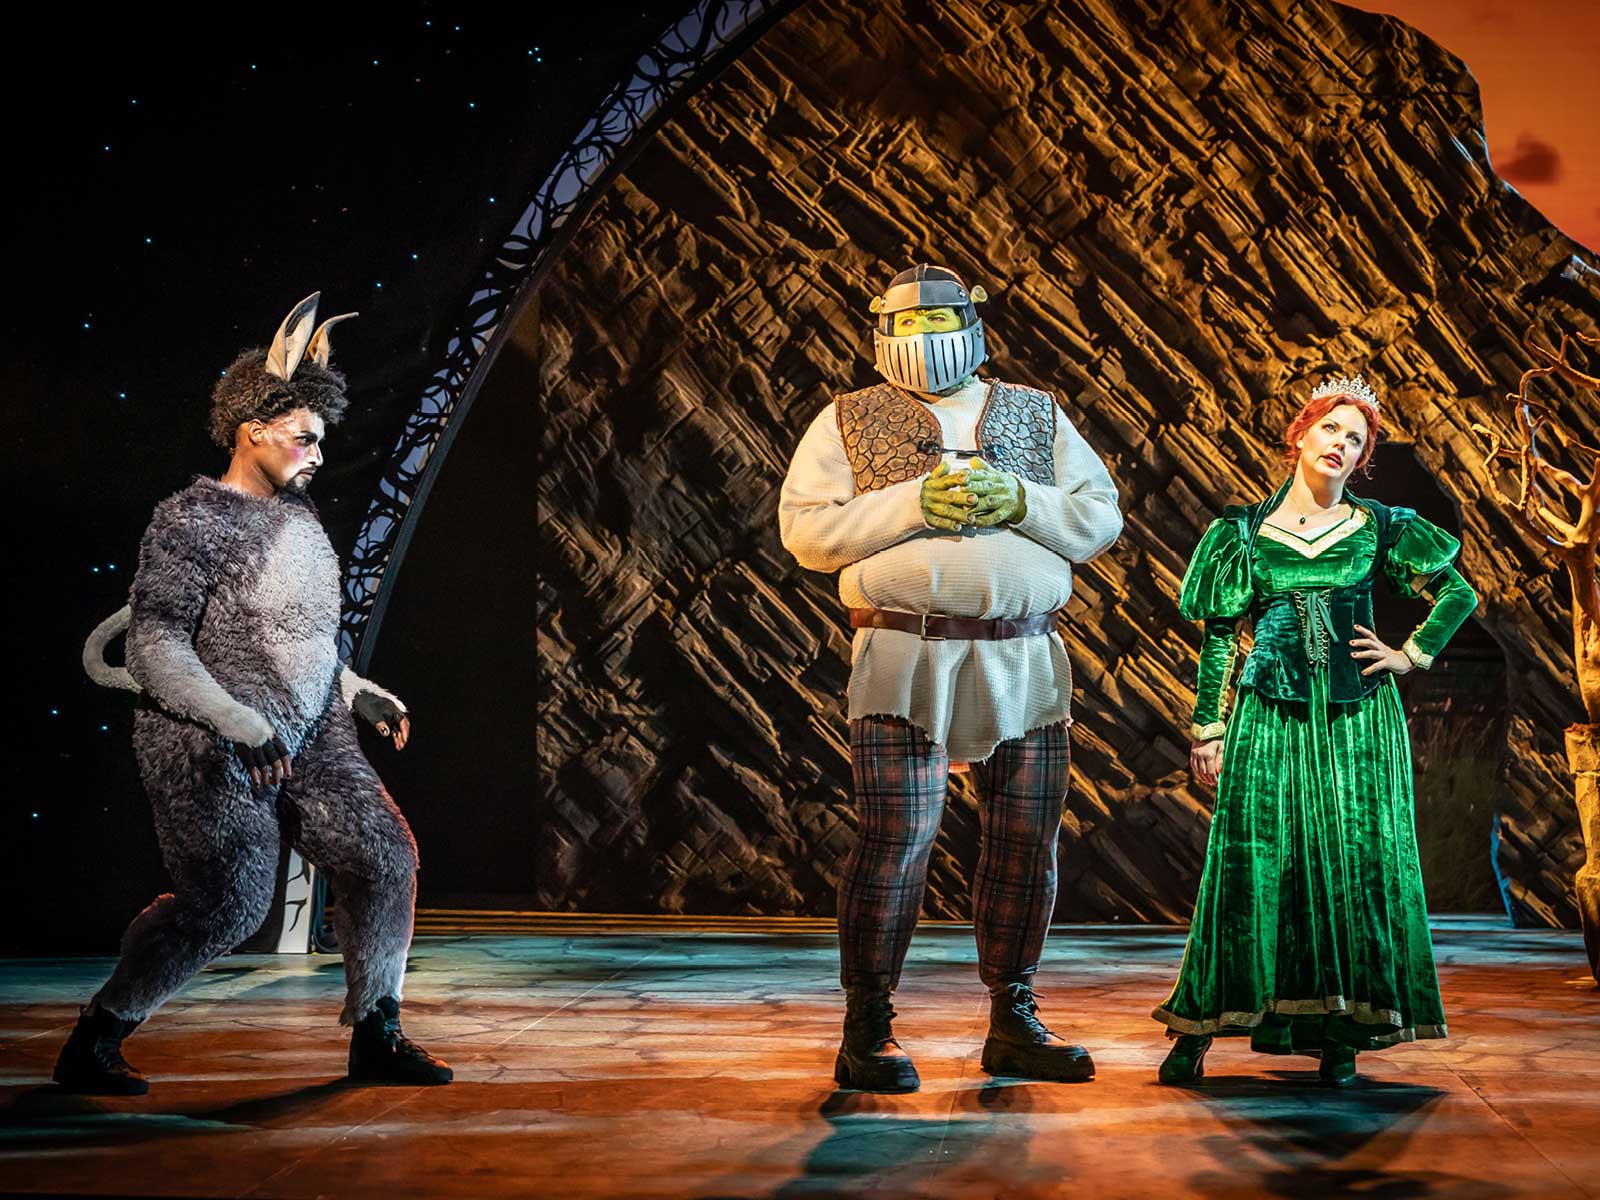 Shrek The Musical photo from the show